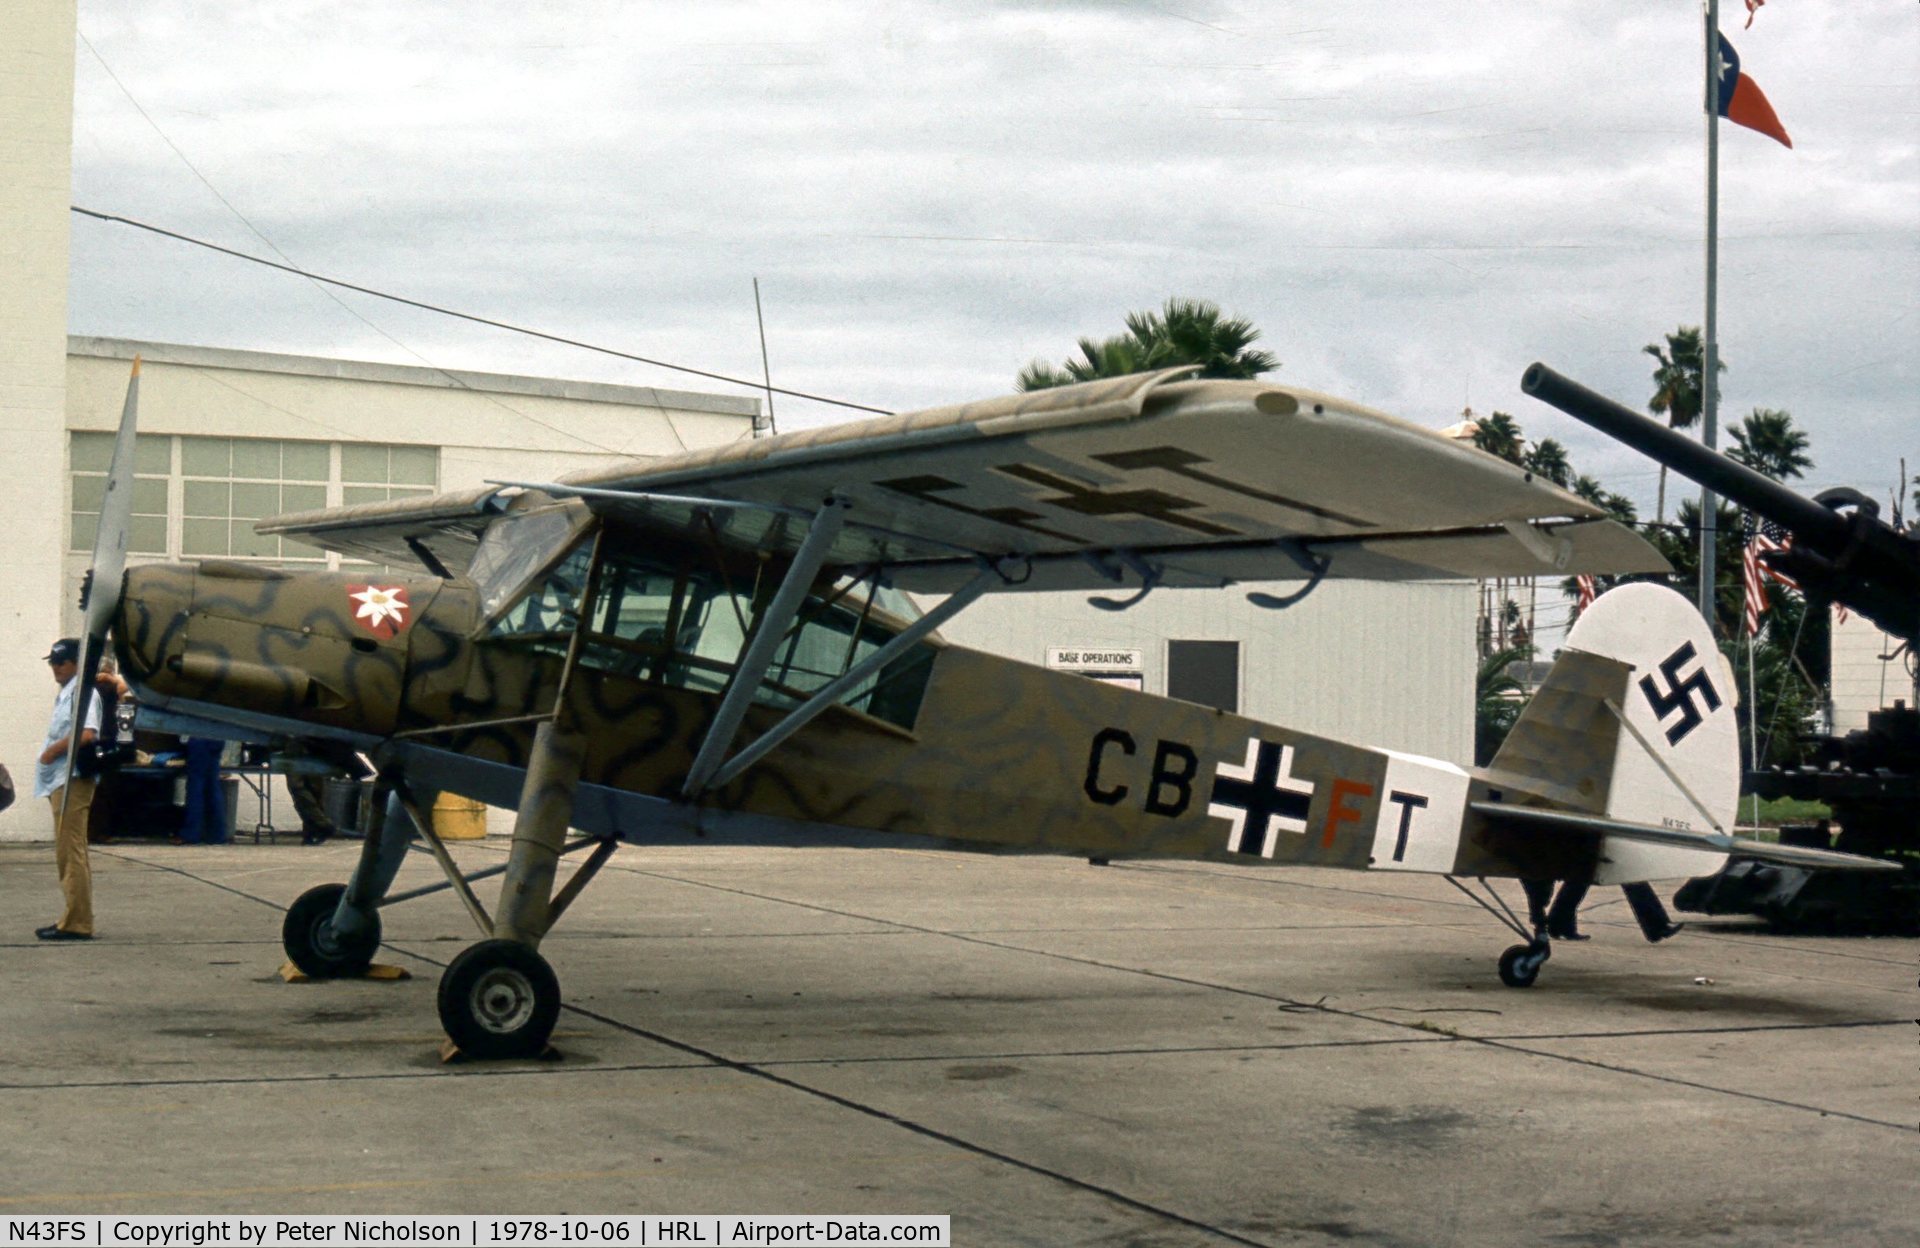 N43FS, 1949 Morane-Saulnier MS-500 Criquet C/N 394, MS.500 Criquet as Fieseler Storch CB+FT on display by the Confederate Air Force at their 1978 Airshow.